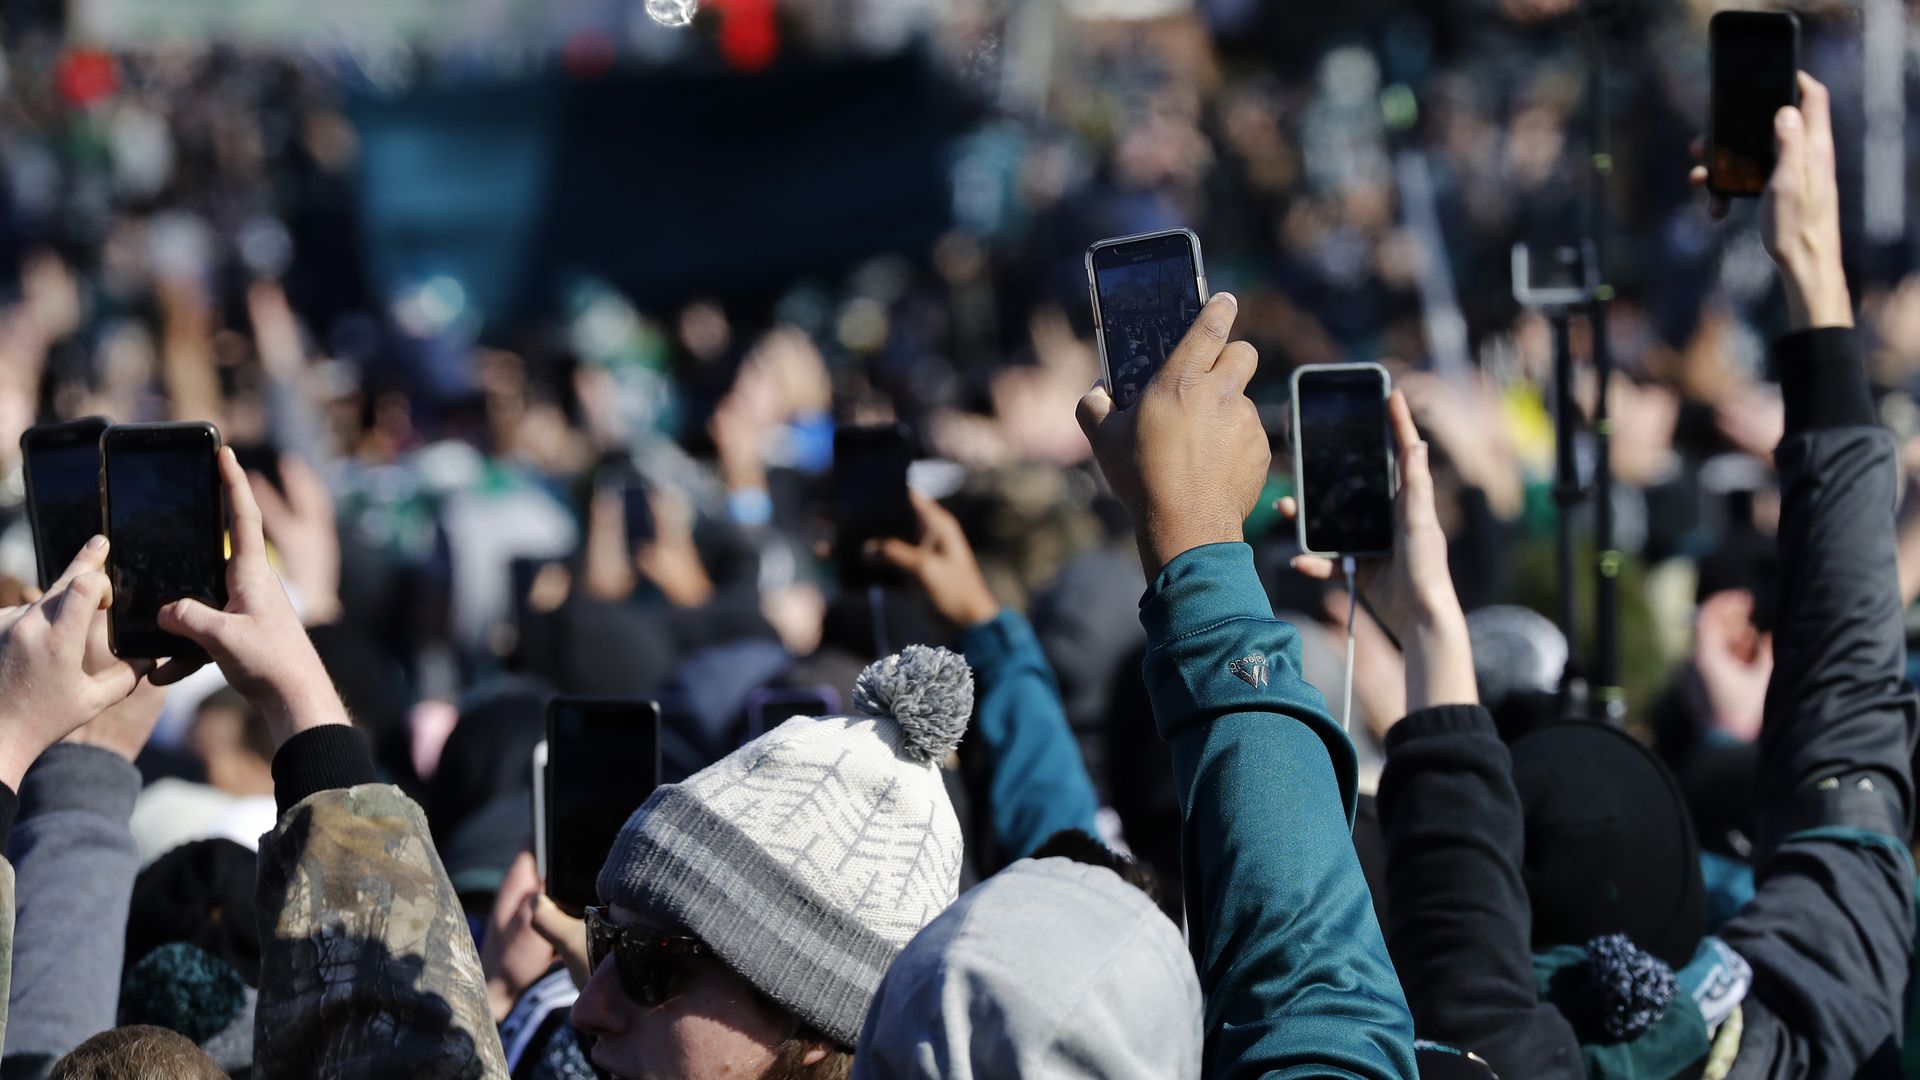 People hold their cell phones up in a crowd.